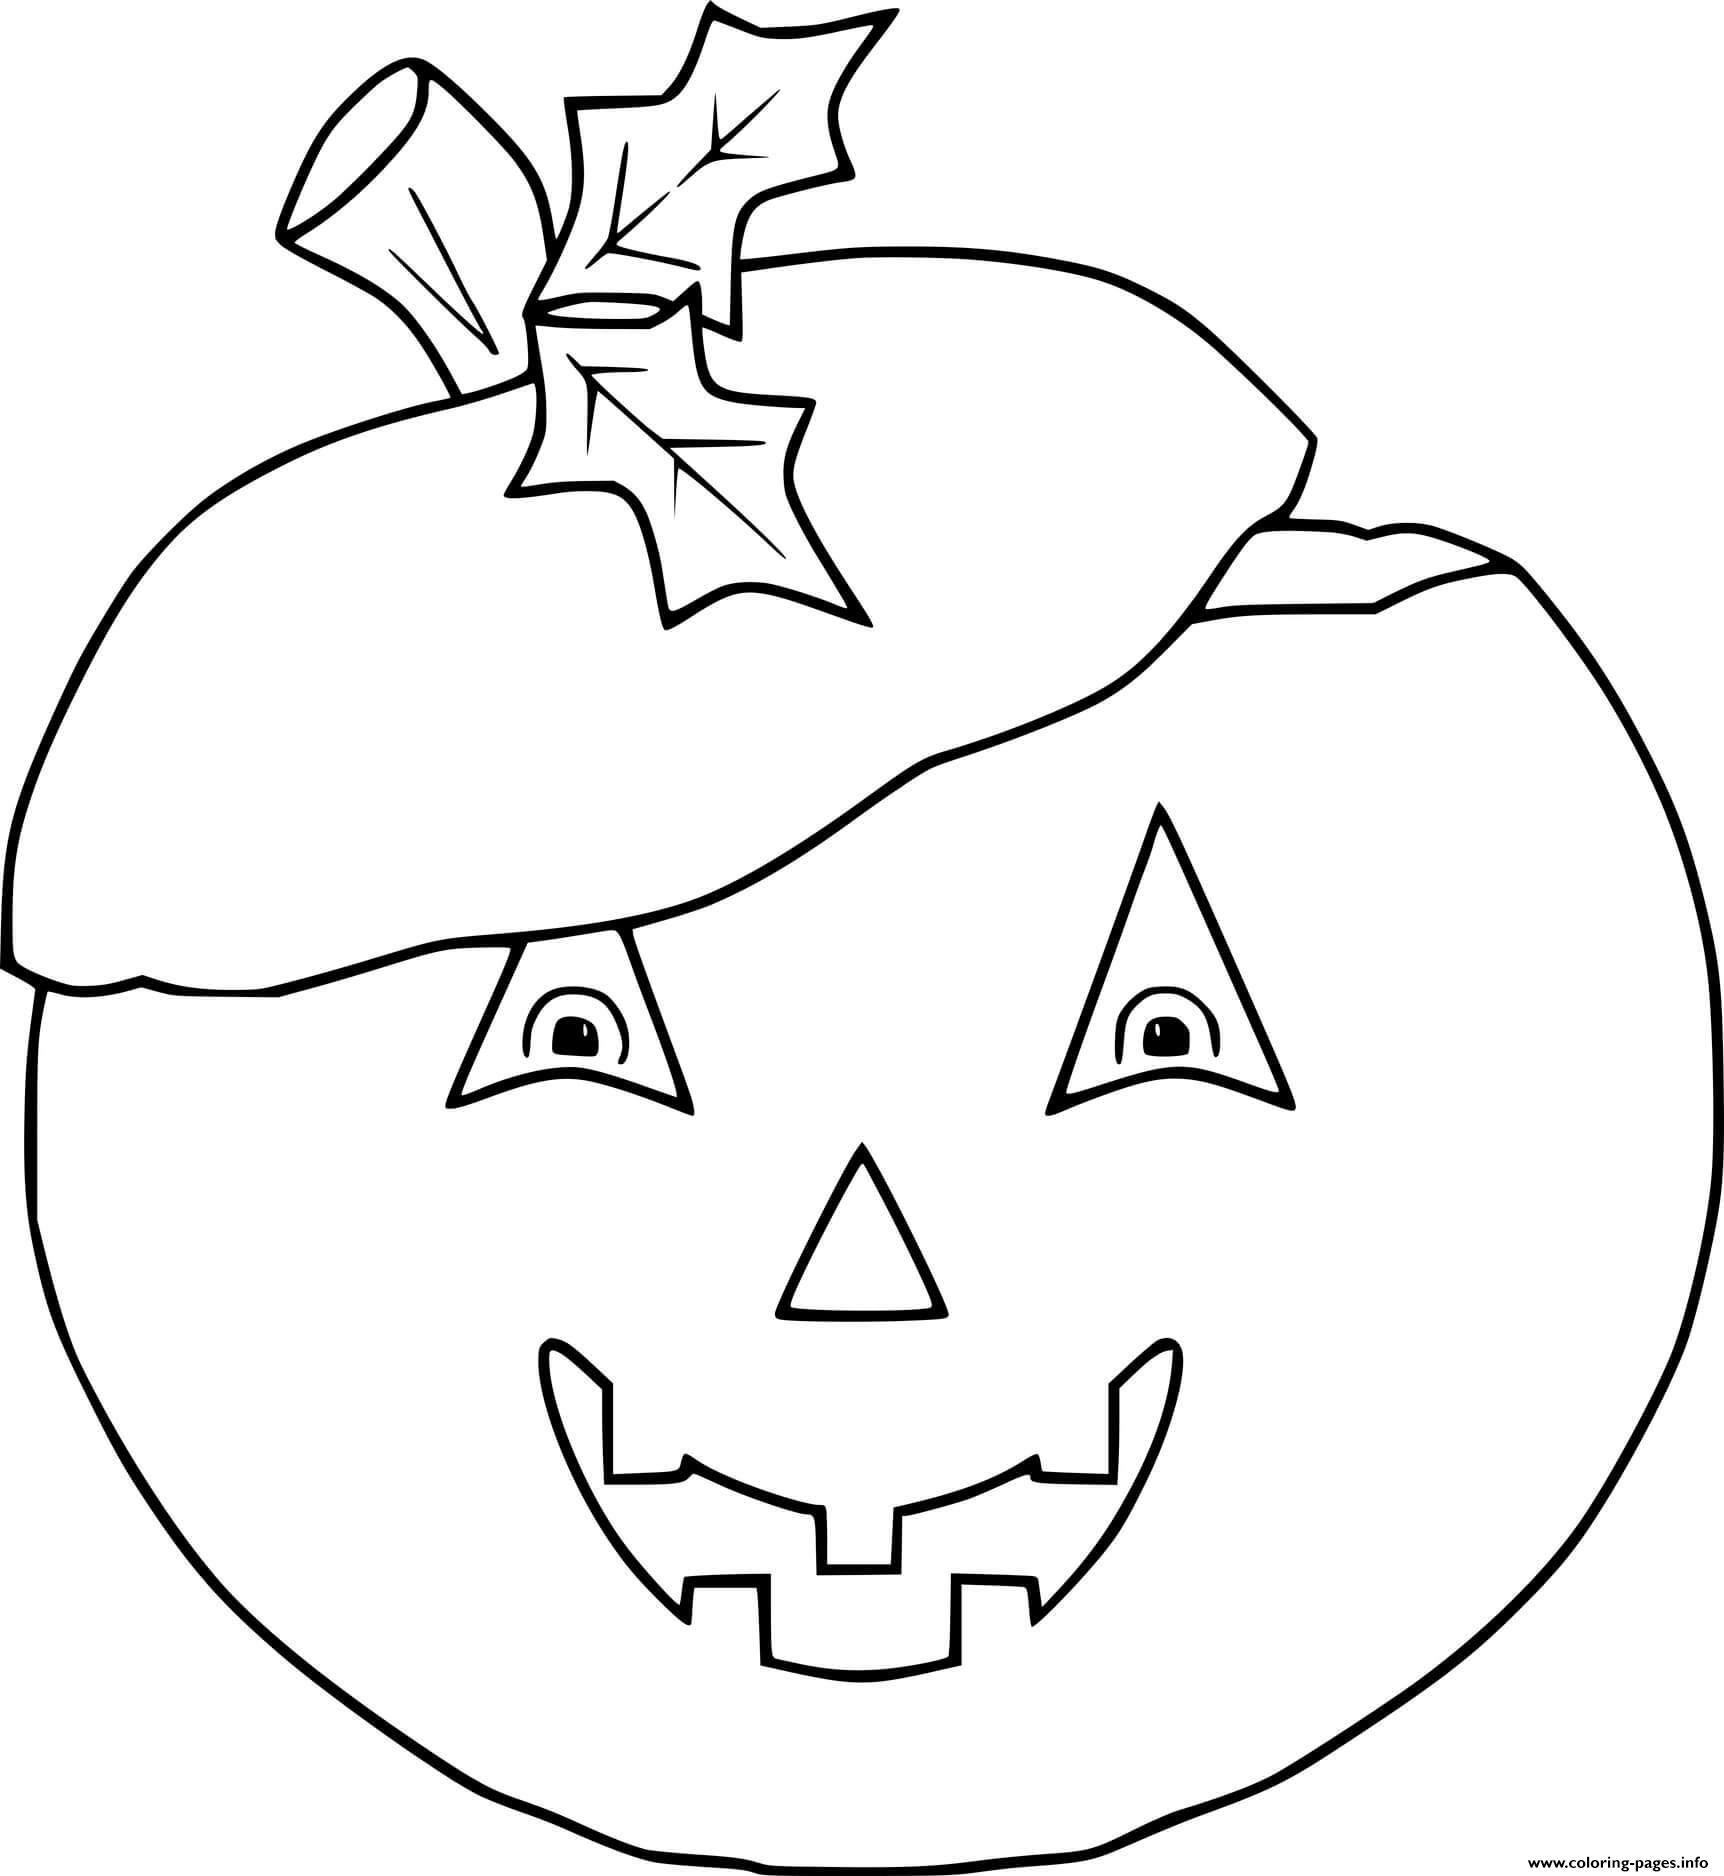 Jack O Lantern With Leaves coloring